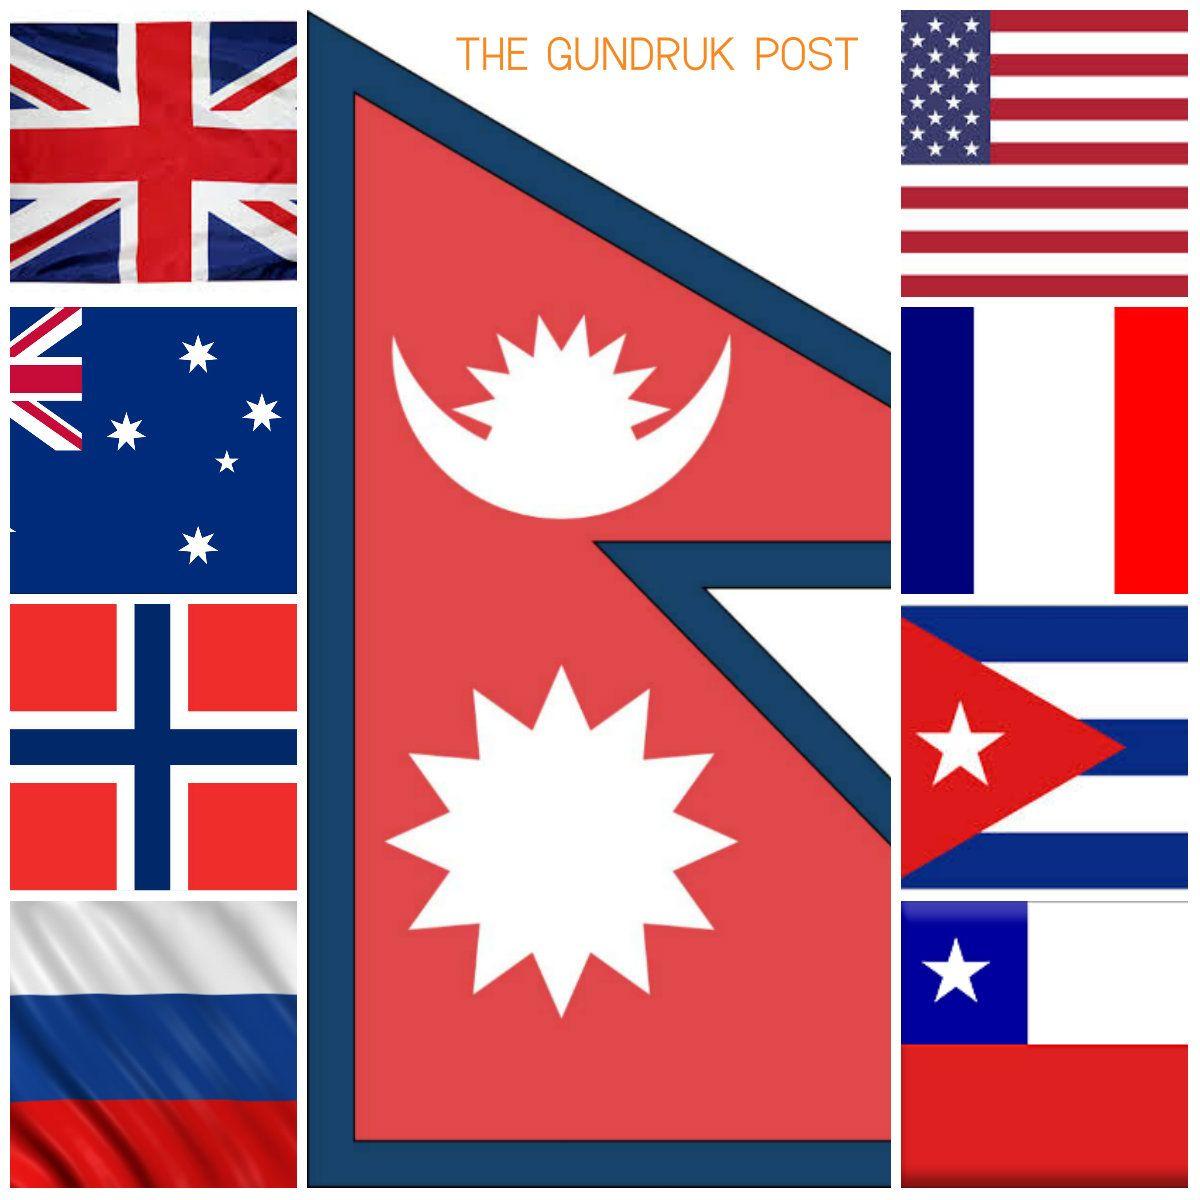 Red White and Blue Flag Logo - INTERESTING! NEPAL SHARE RED WHITE BLUE FLAG COLORS WITH USA, UK ...